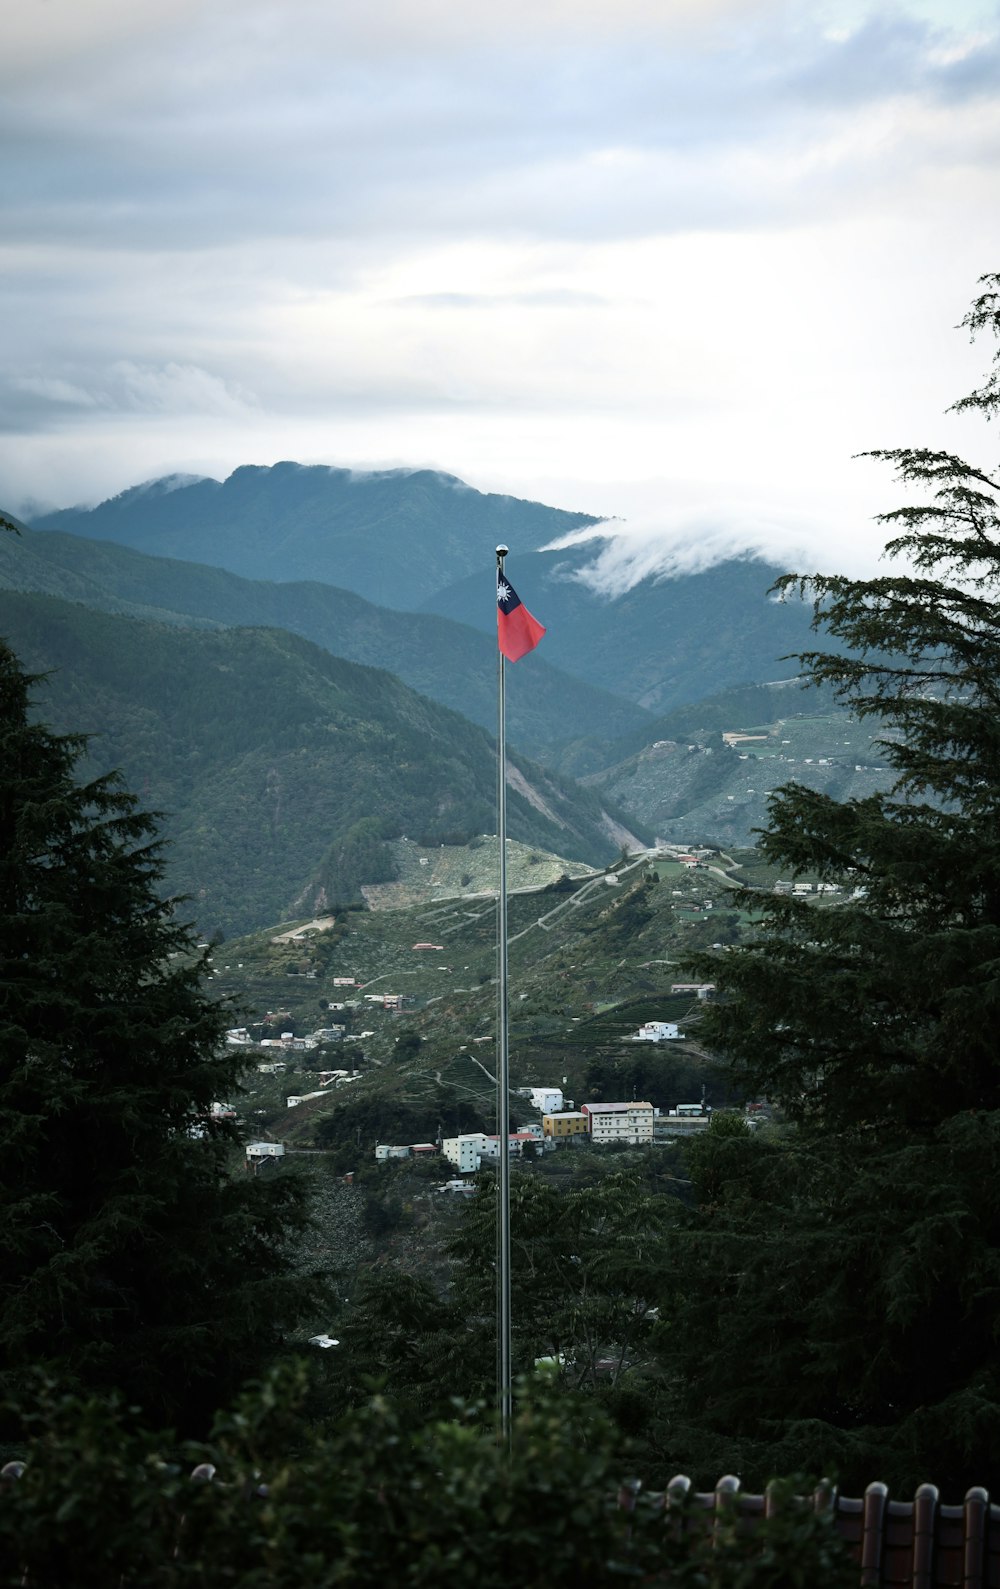 Red and white flag on pole near green trees and mountains during daytime  photo – Free Grey Image on Unsplash